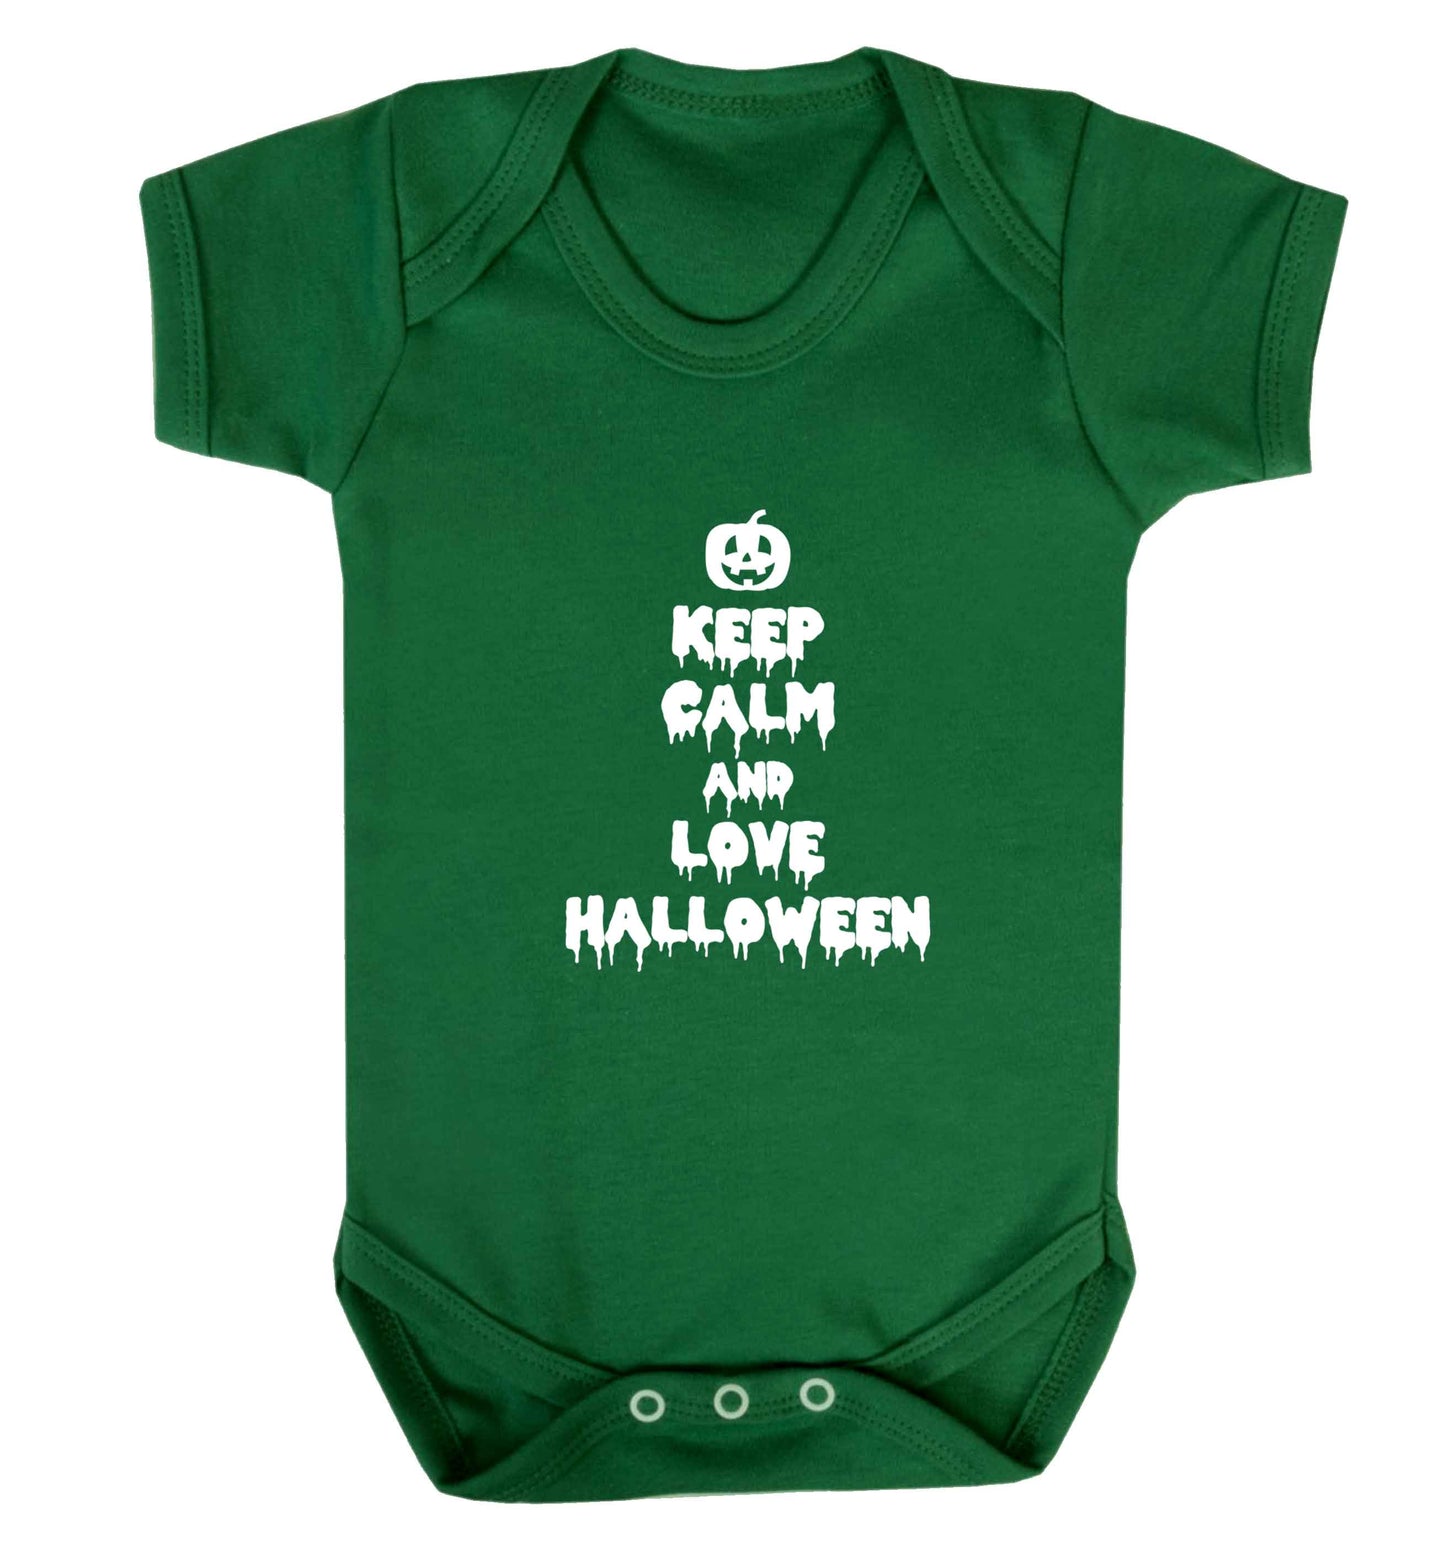 Keep calm and love halloween baby vest green 18-24 months